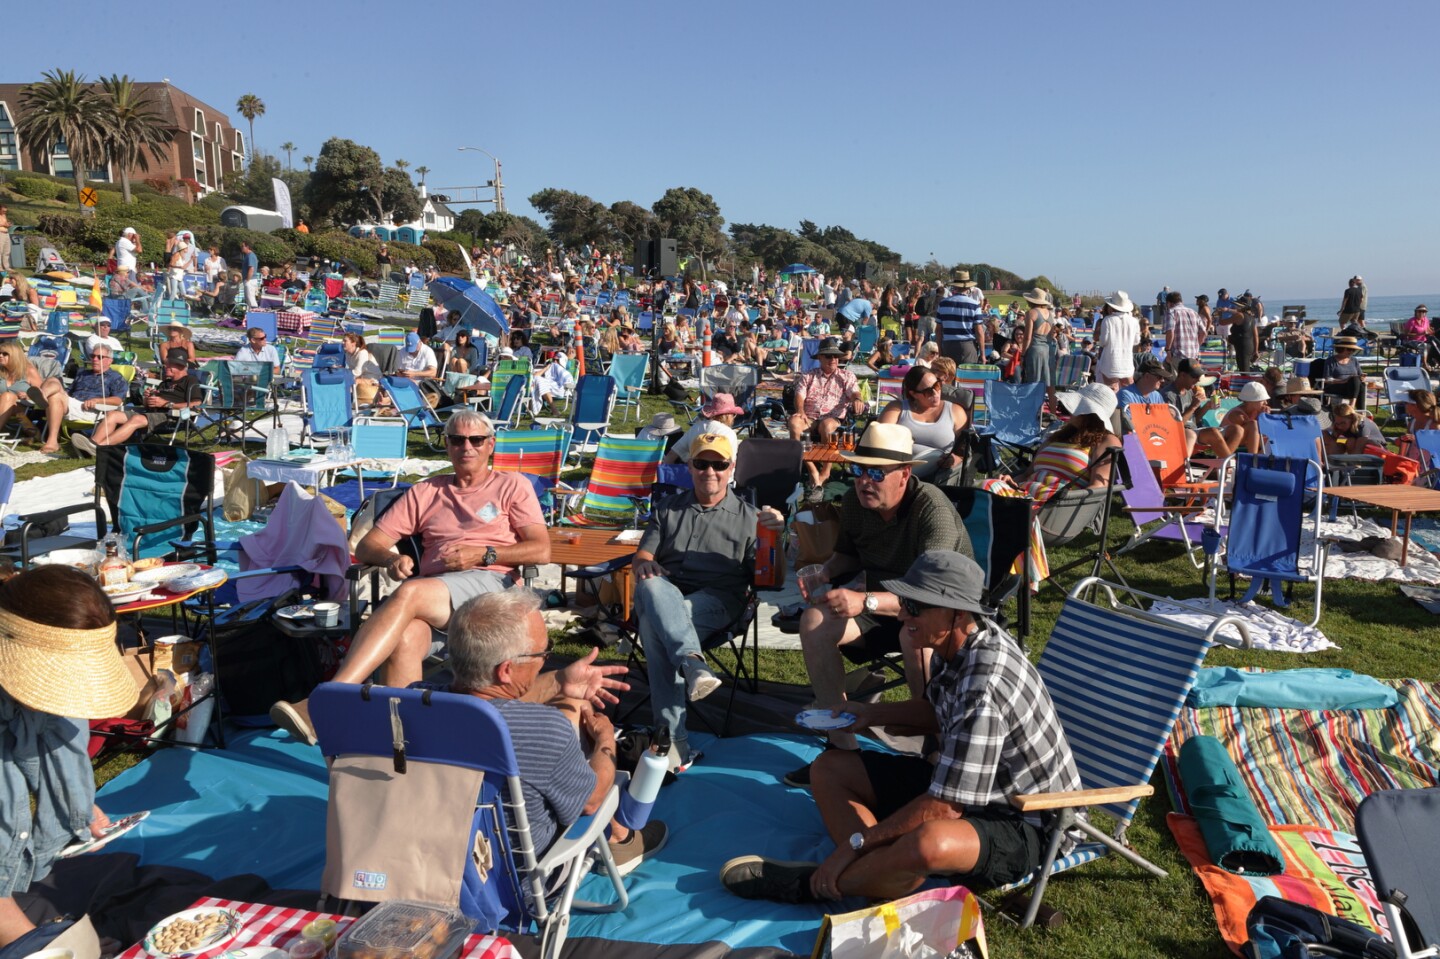 The first Del Mar Summer Twilight Concert of the 2022 season